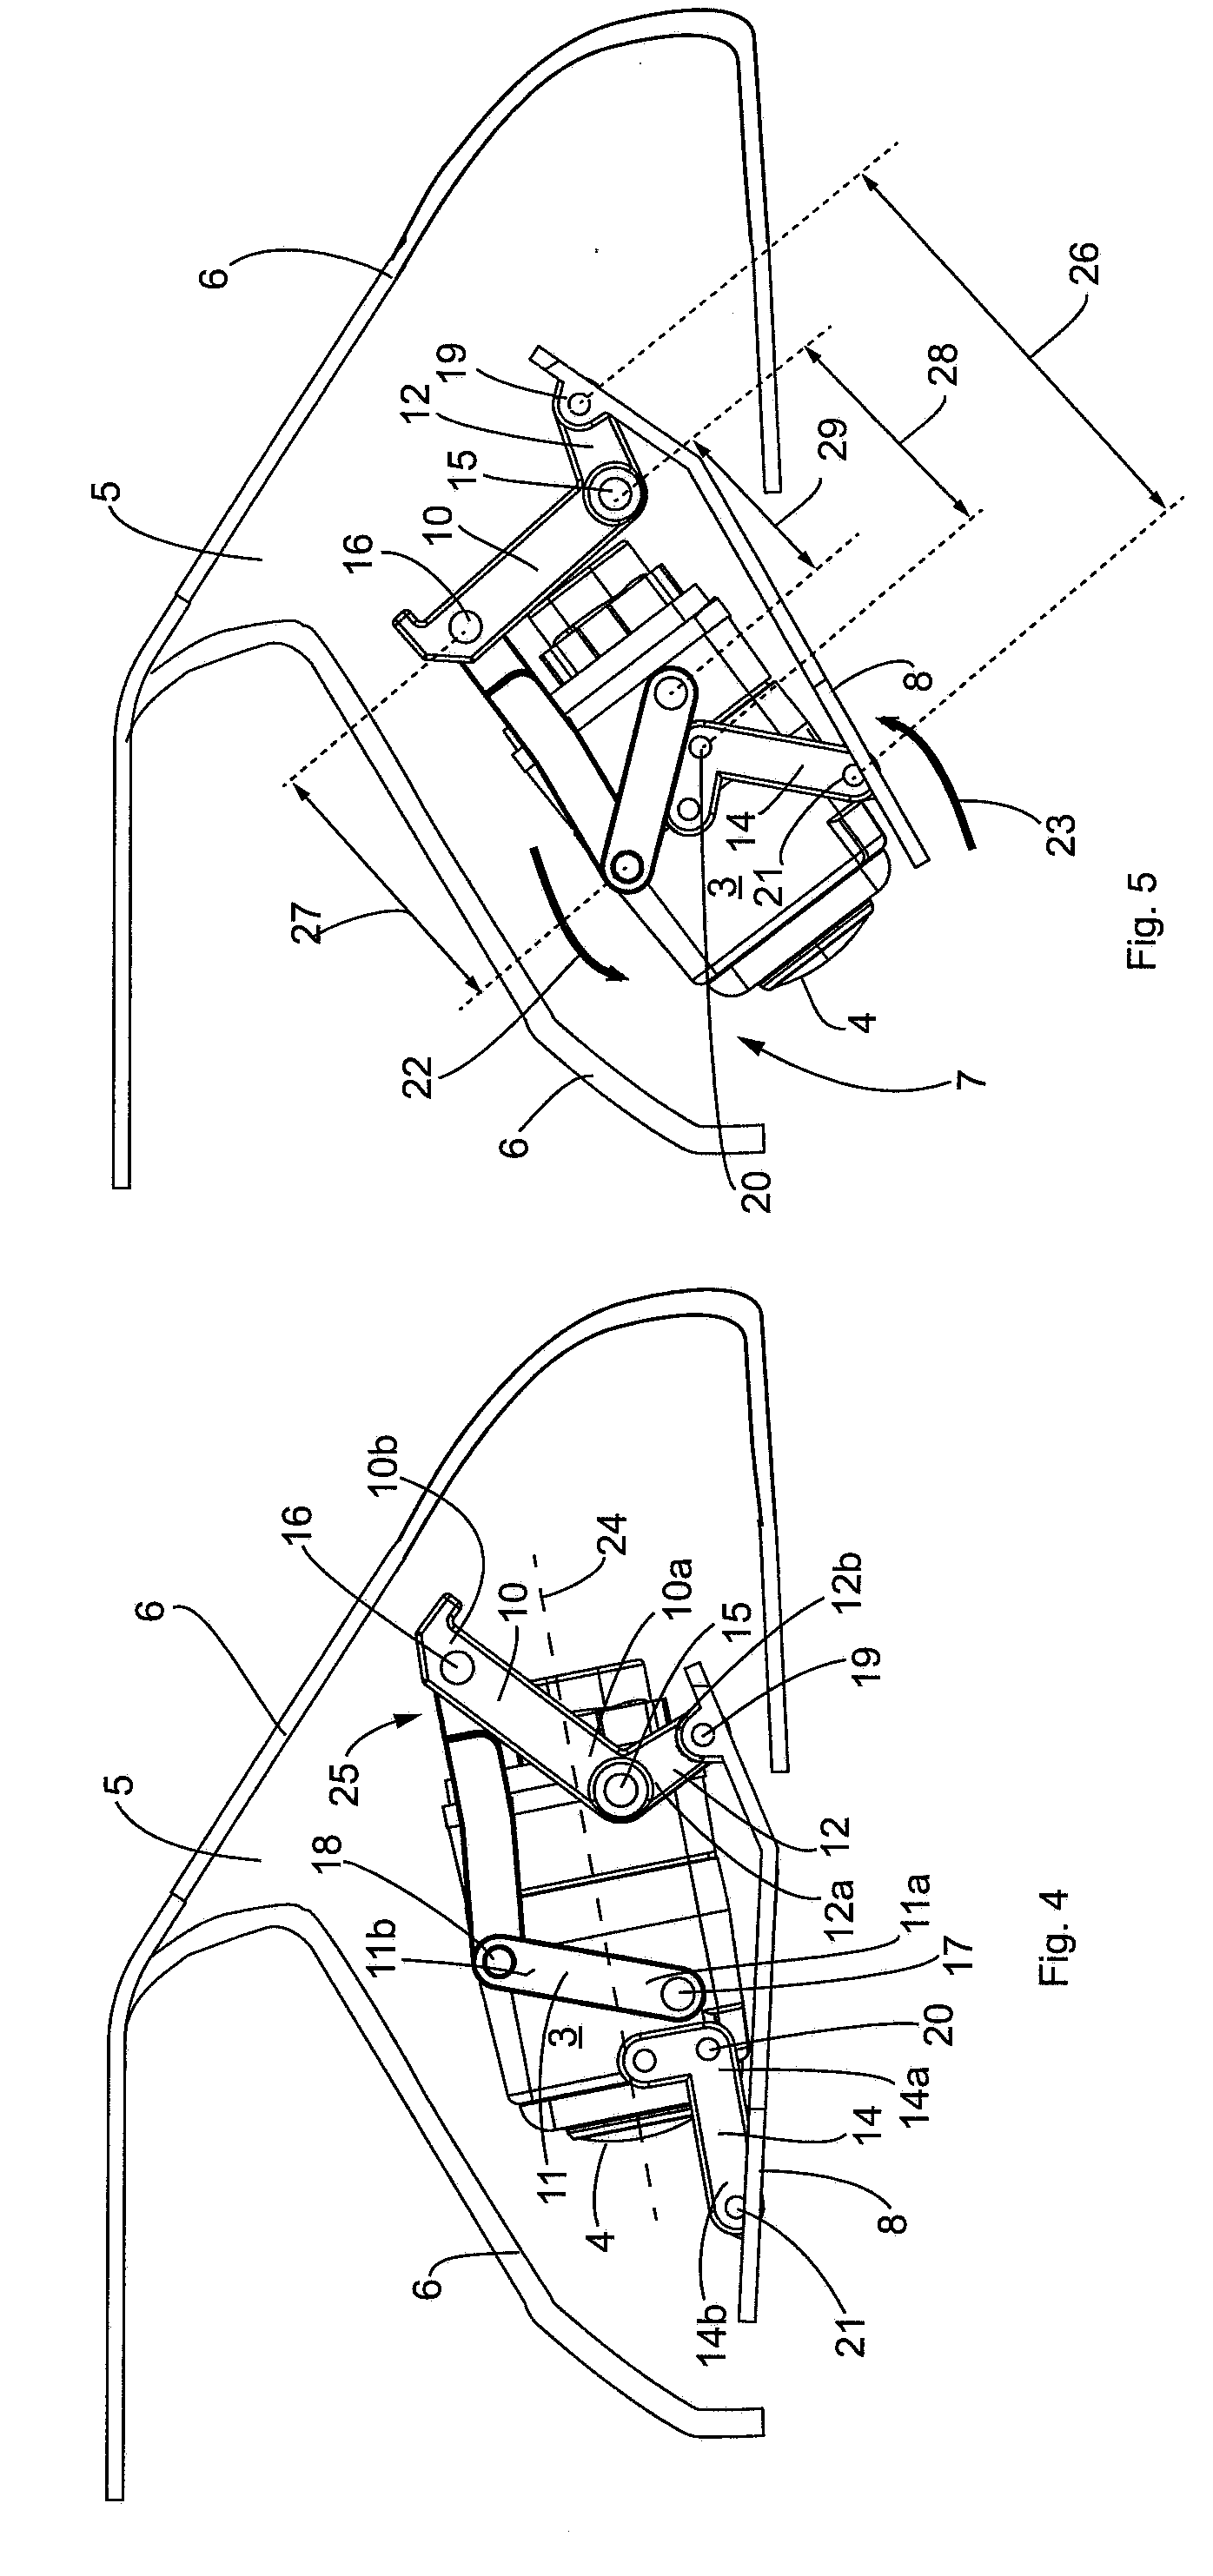 Device having a camera unit and a cover element